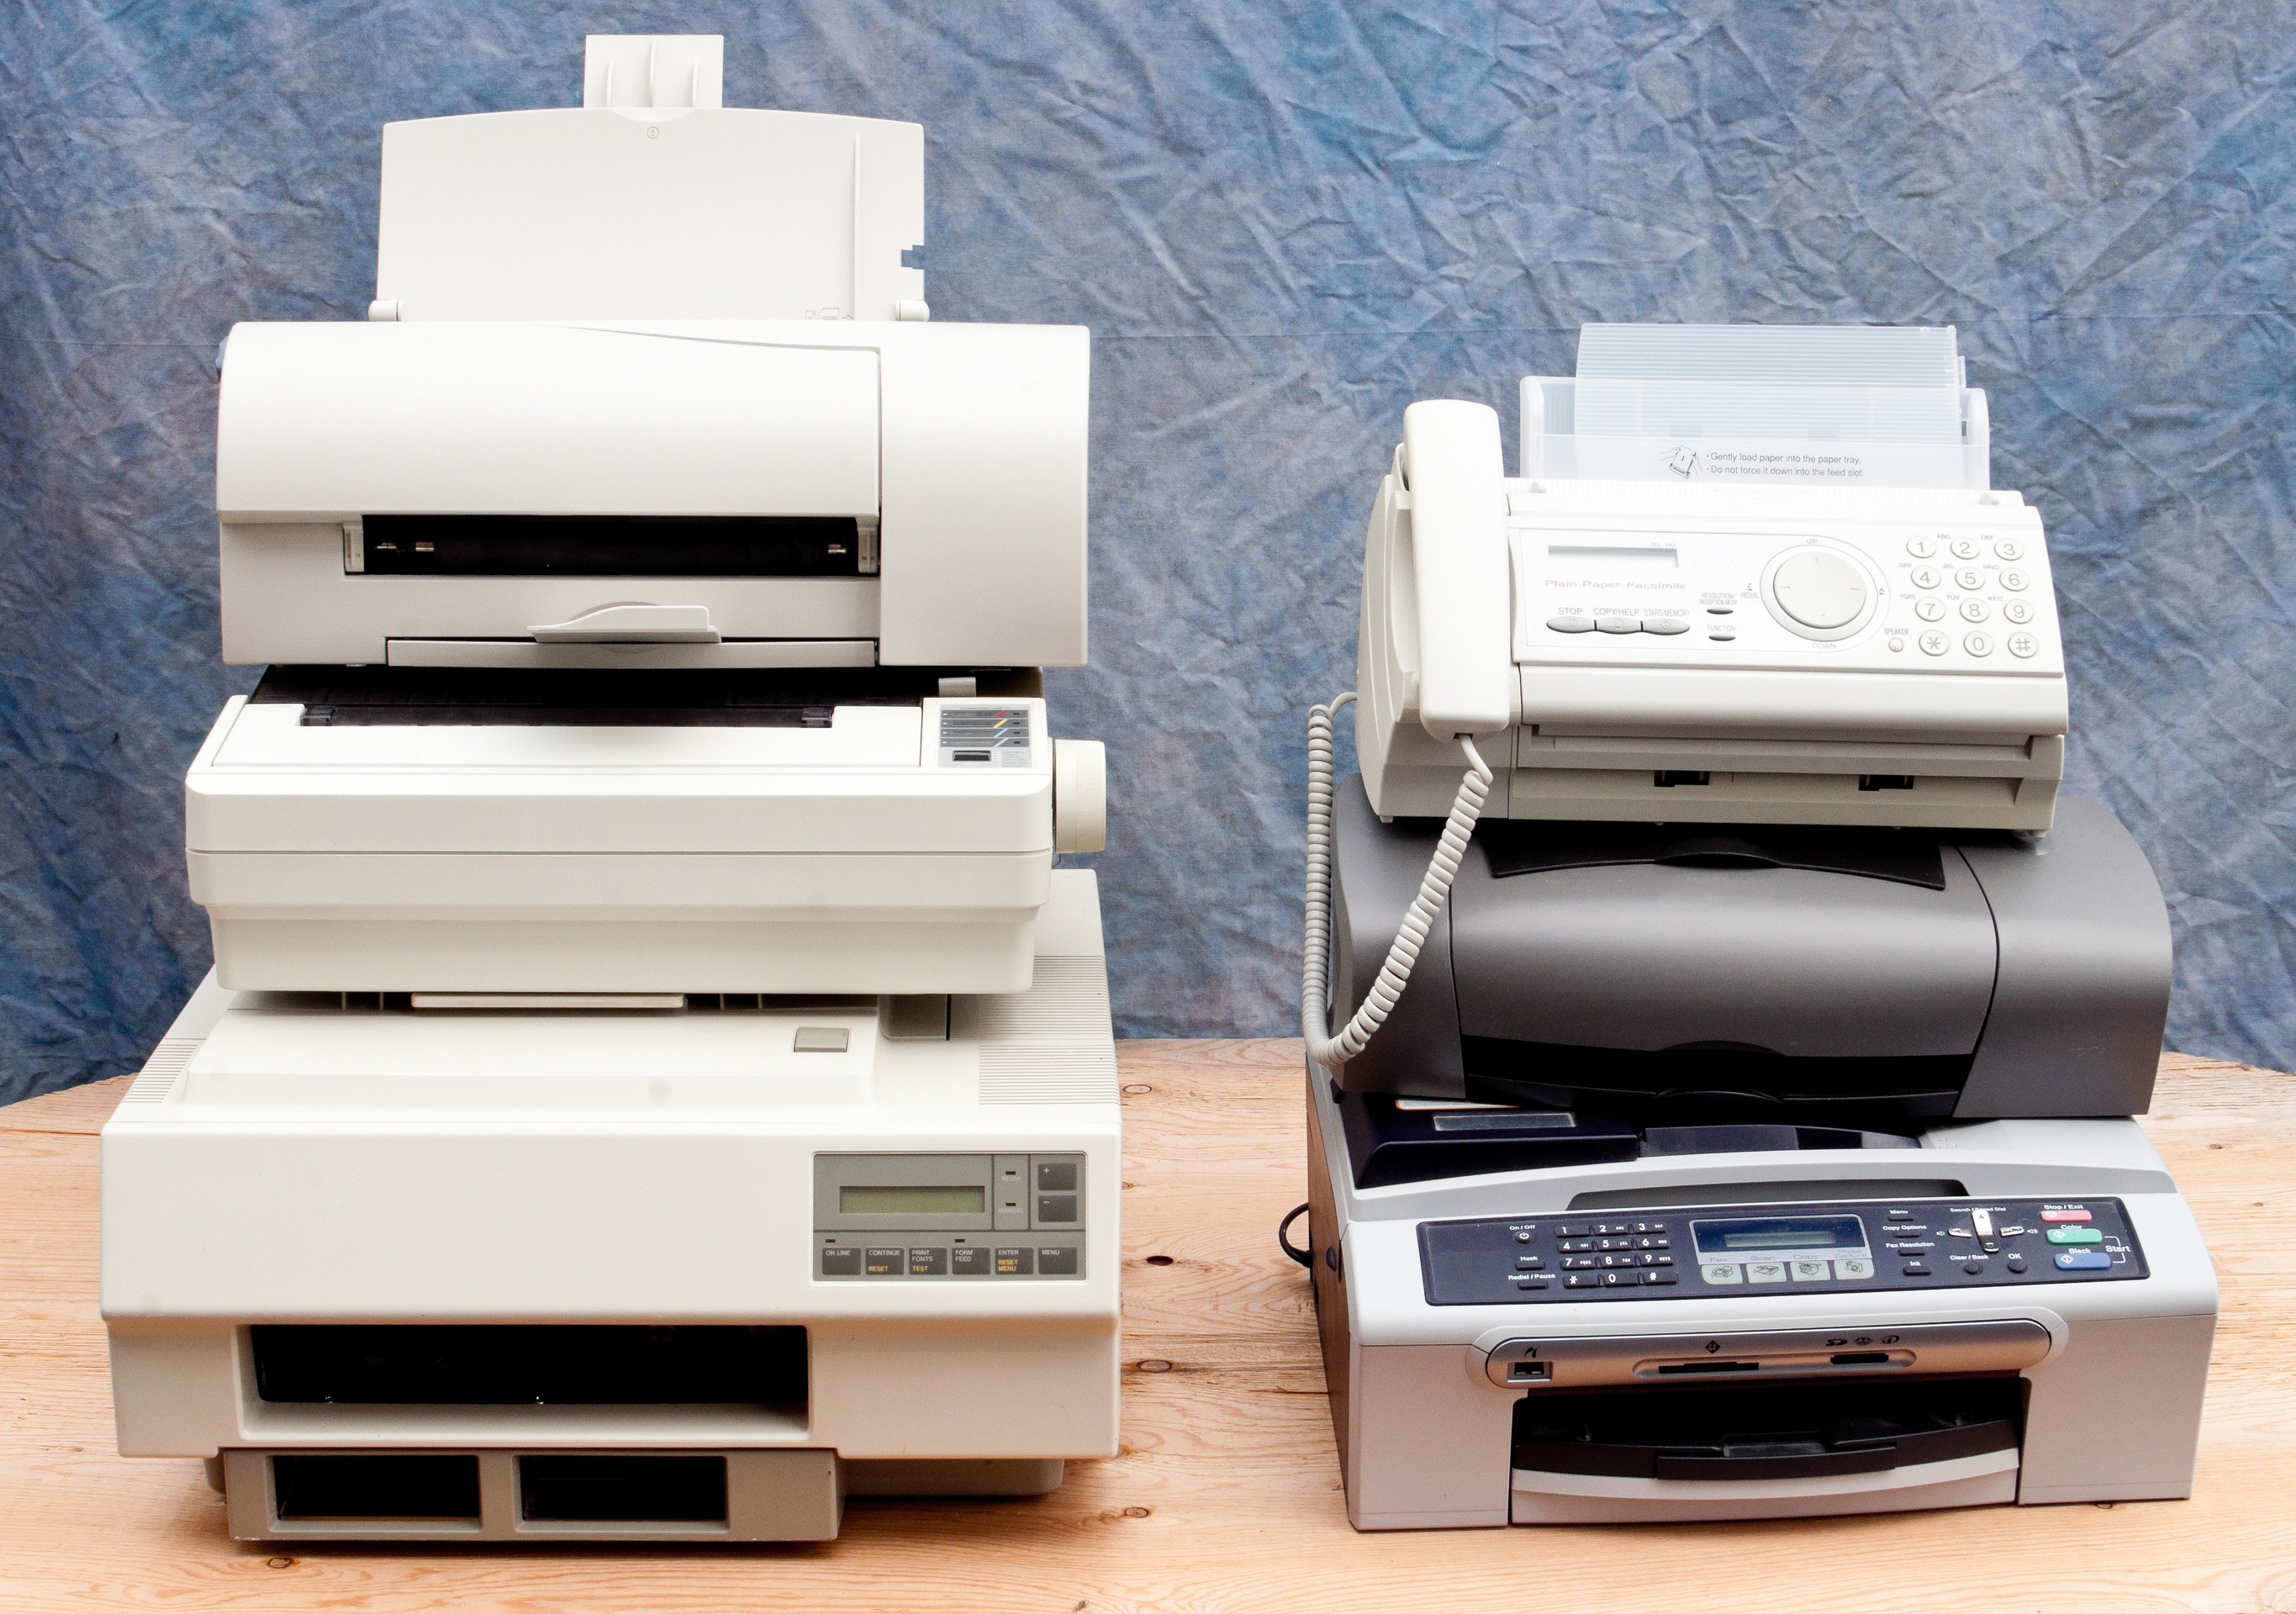 printers scanners and fax machines